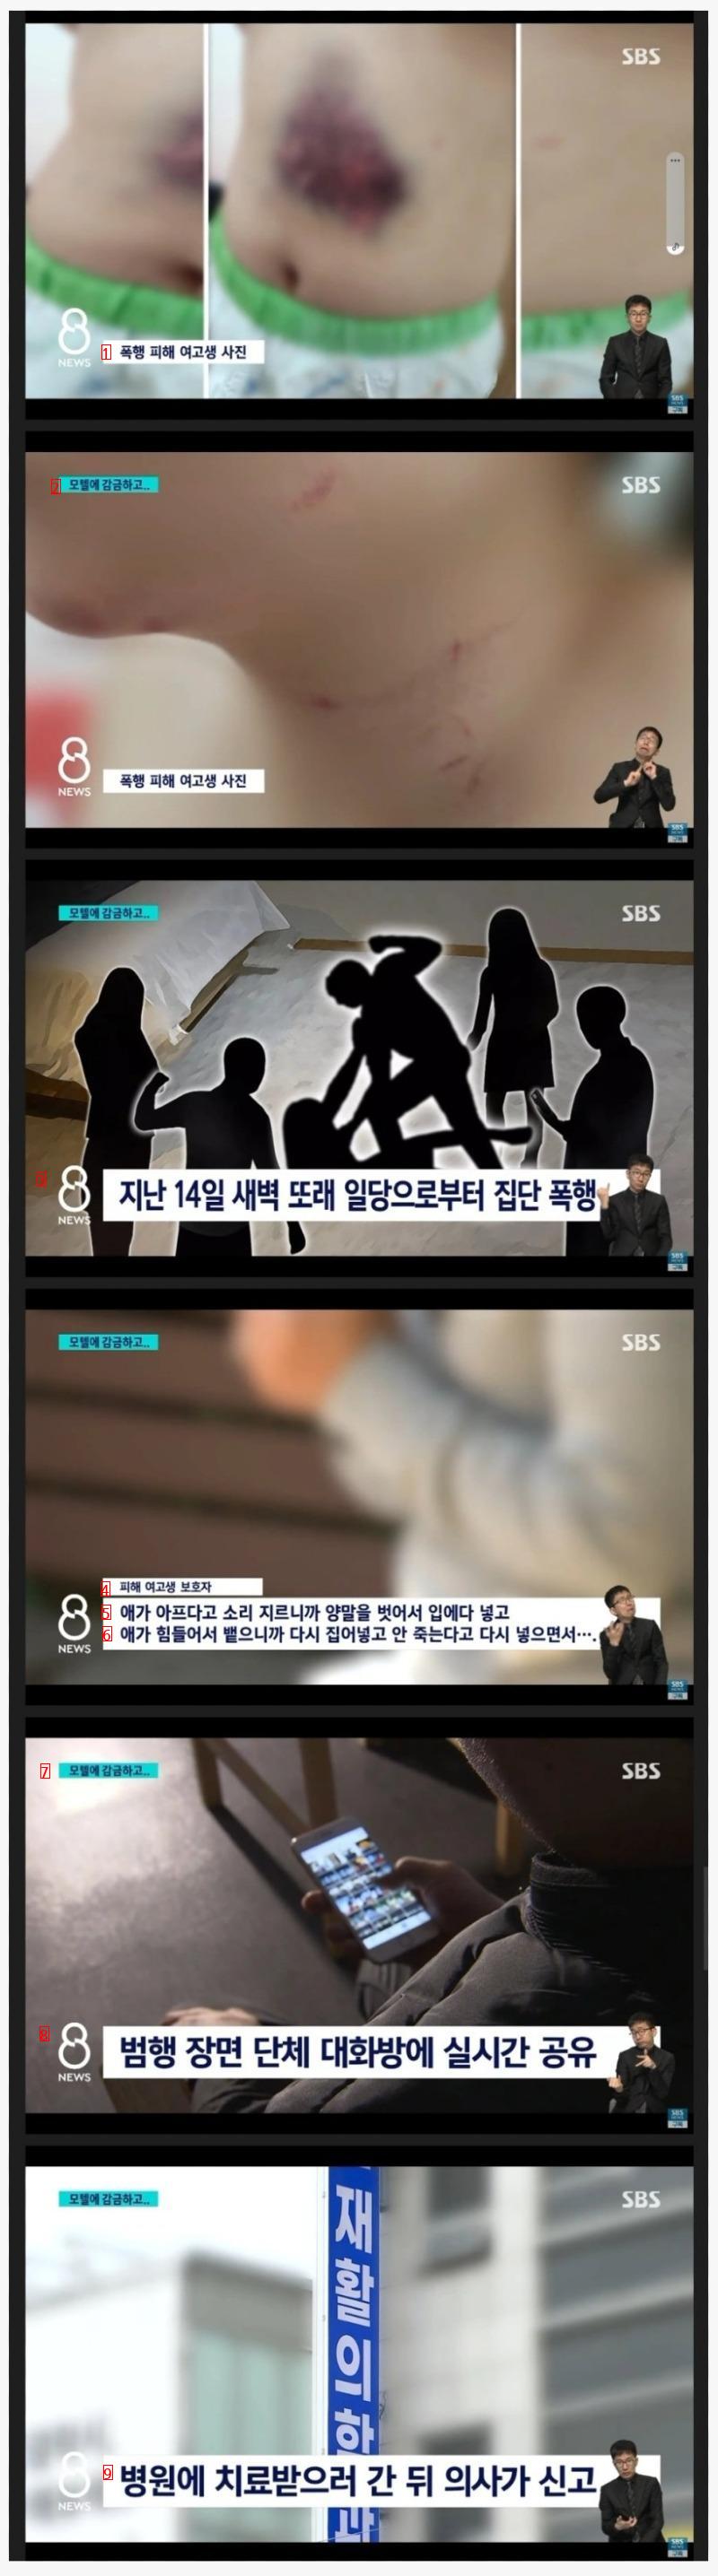 A group of high school girls in Daejeon were sexually assaulted